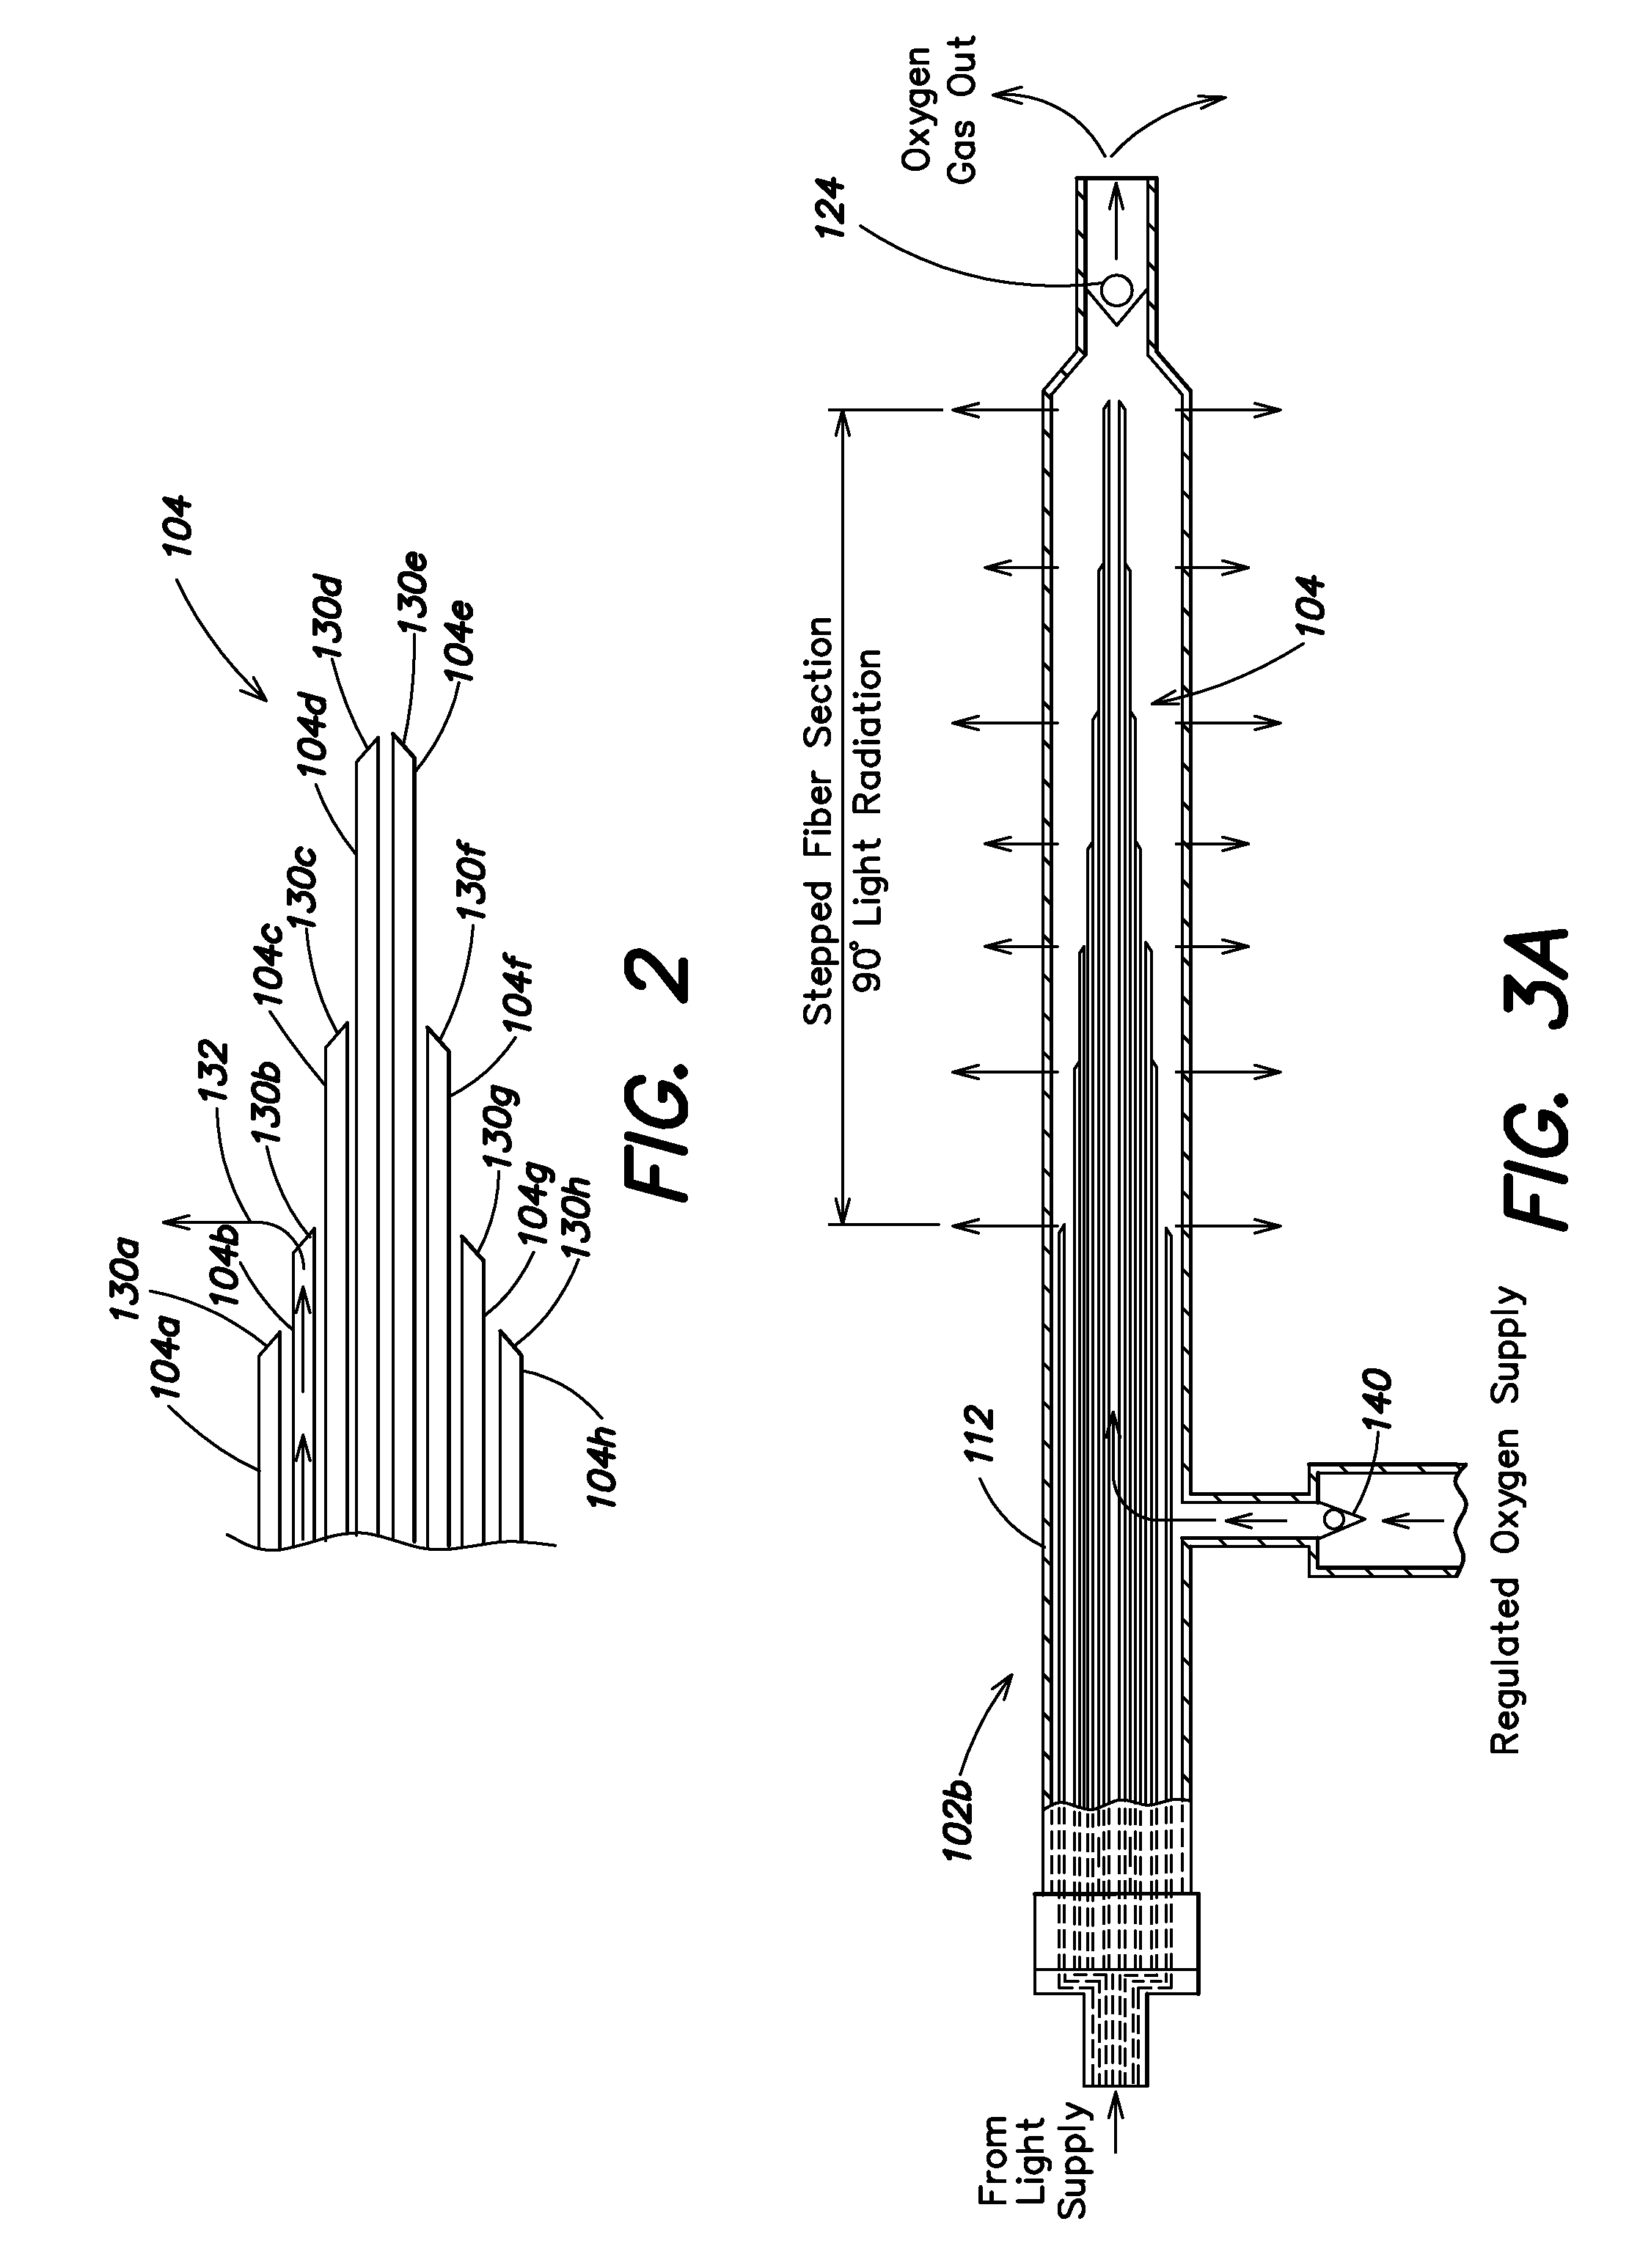 Wound management systems and methods for using the same